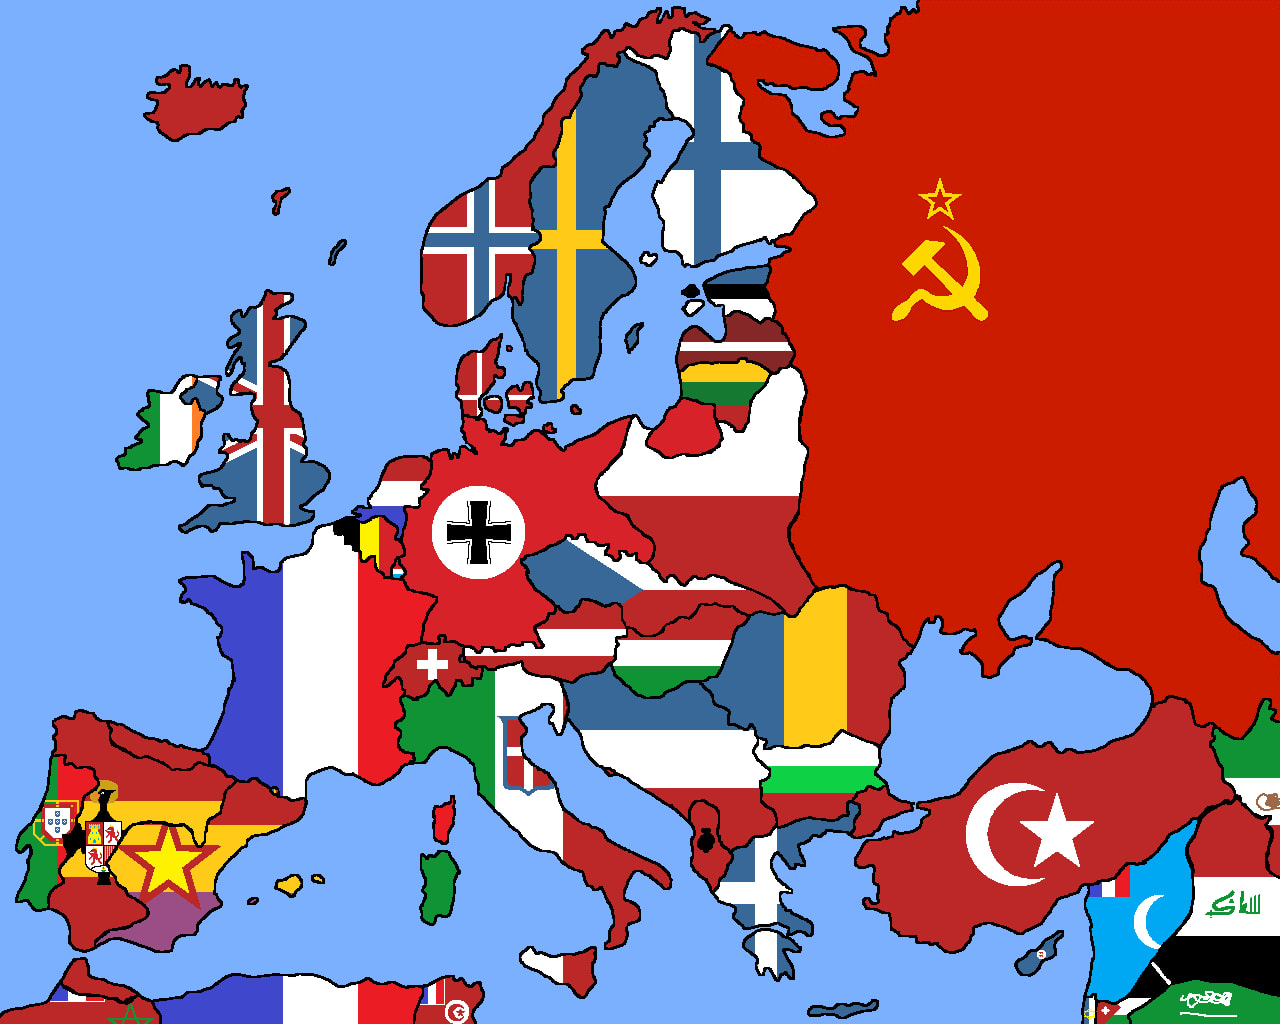 Flag map of 1937 Europe that i made. Hope you like it!